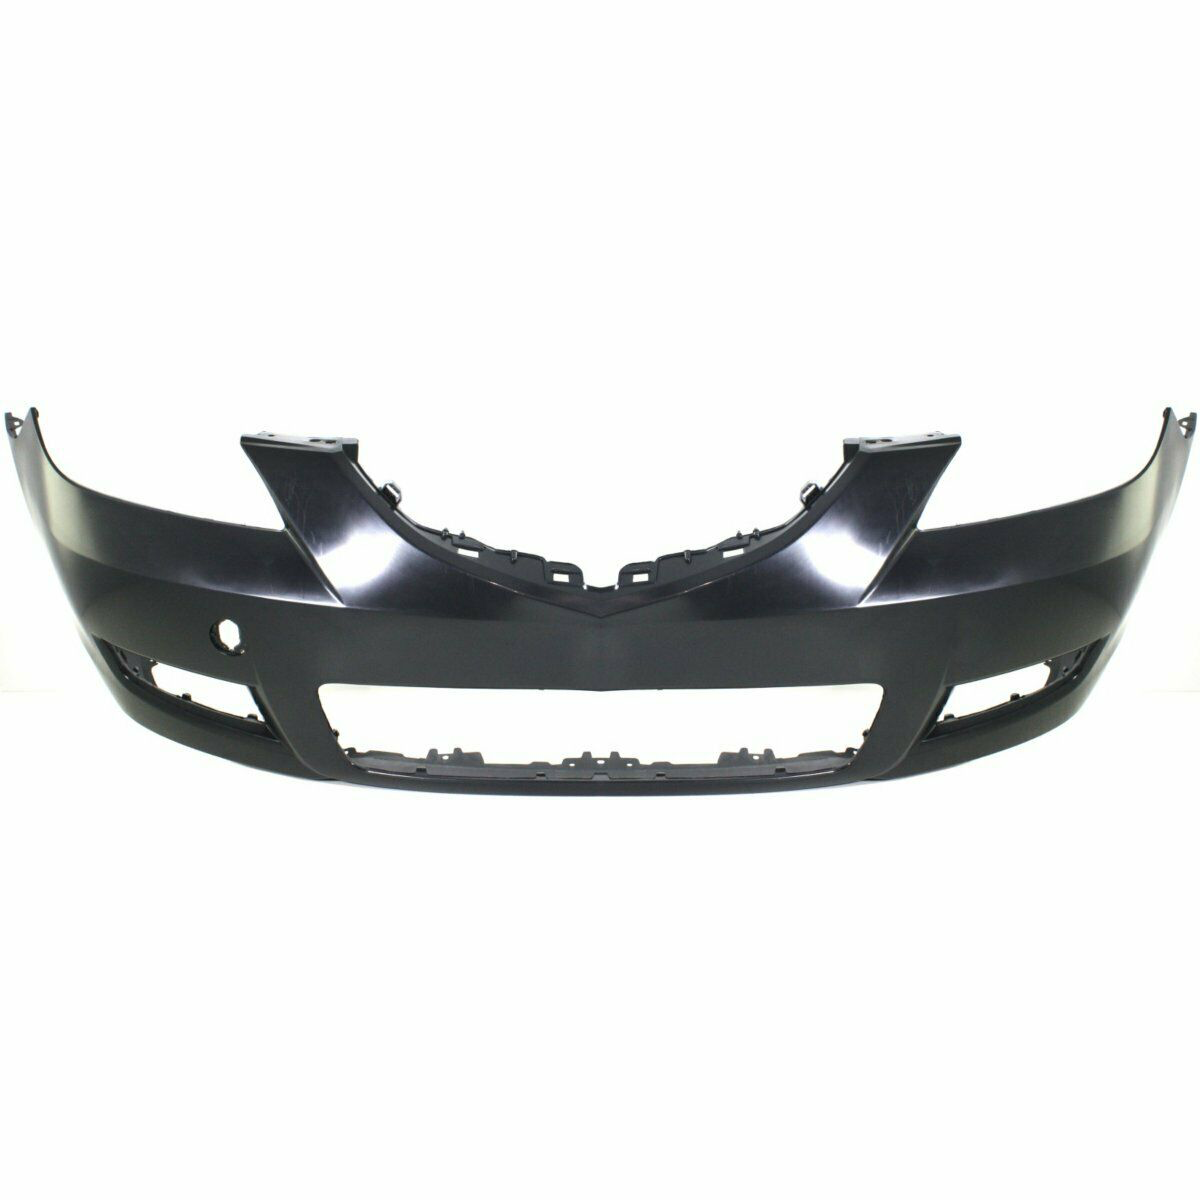 2007-2009 Mazda 3 Front Bumper Painted to Match